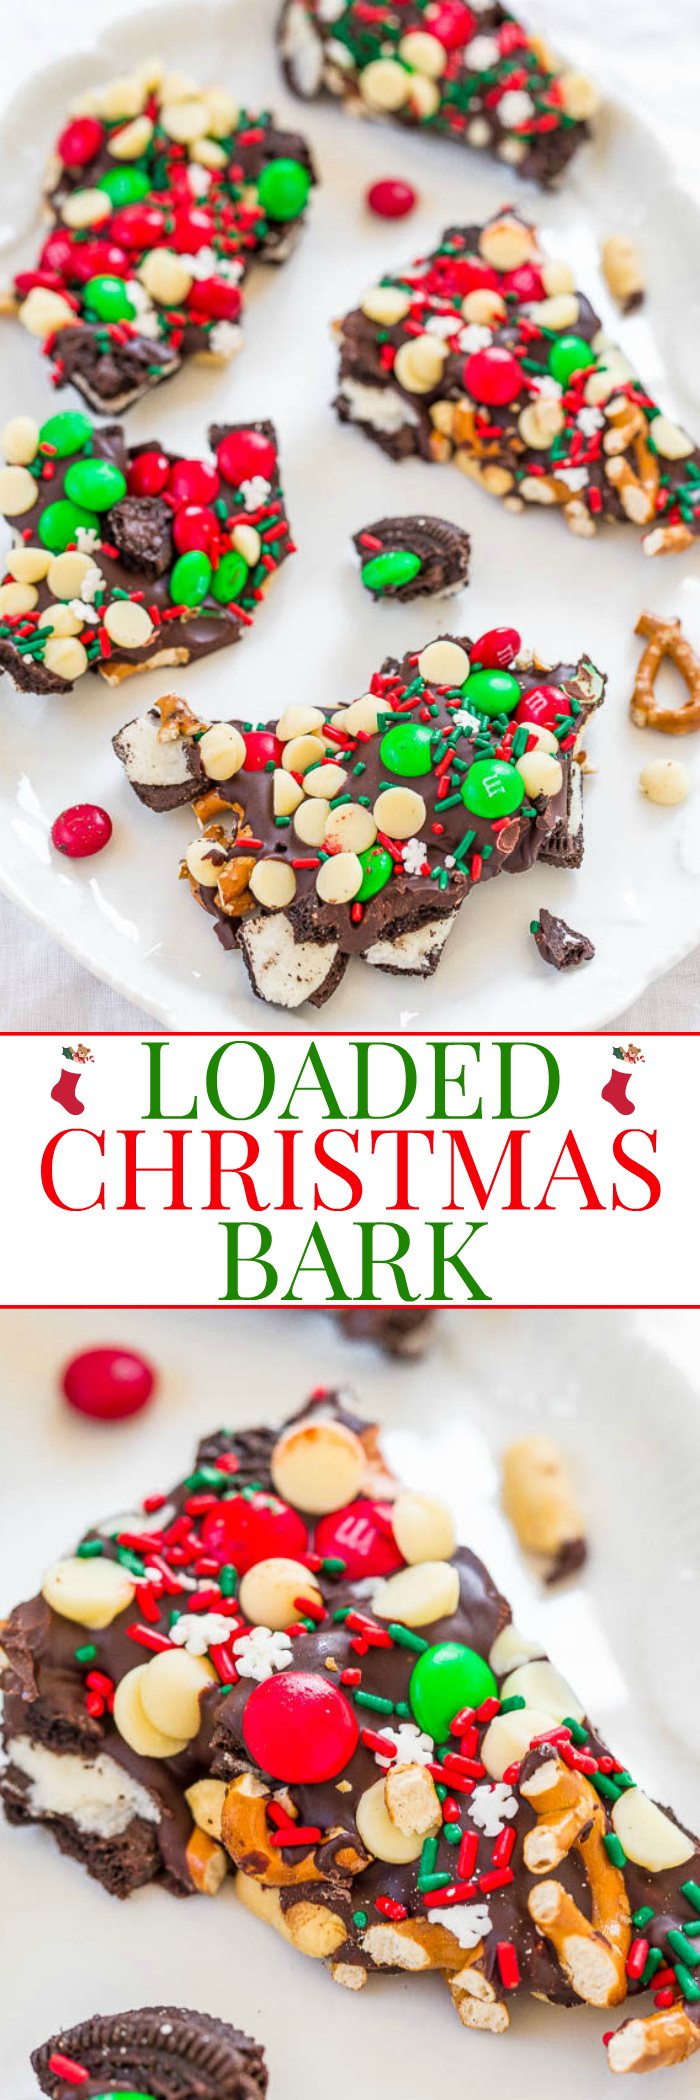 Loaded Christmas Bark - This EASY, no-bake chocolate bark is LOADED with goodies!! Oreos, M&M's, peanuts, pretzels, and sprinkles! Great for holiday parties and cookie exchanges! Salty, sweet, and addictively good!!